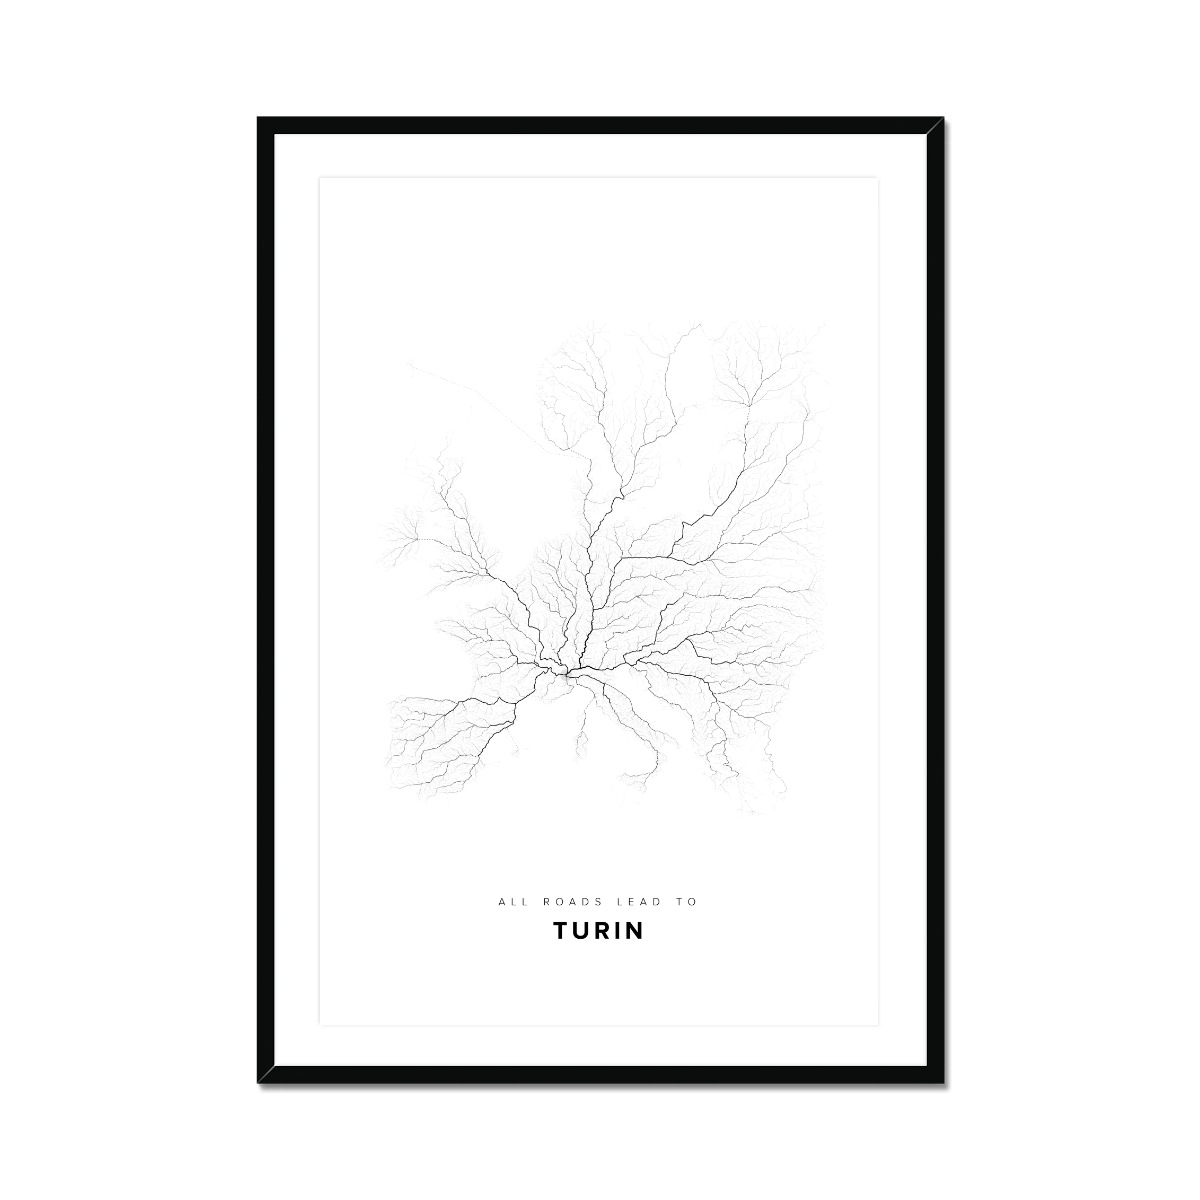 All roads lead to Turin (Italy) Fine Art Map Print